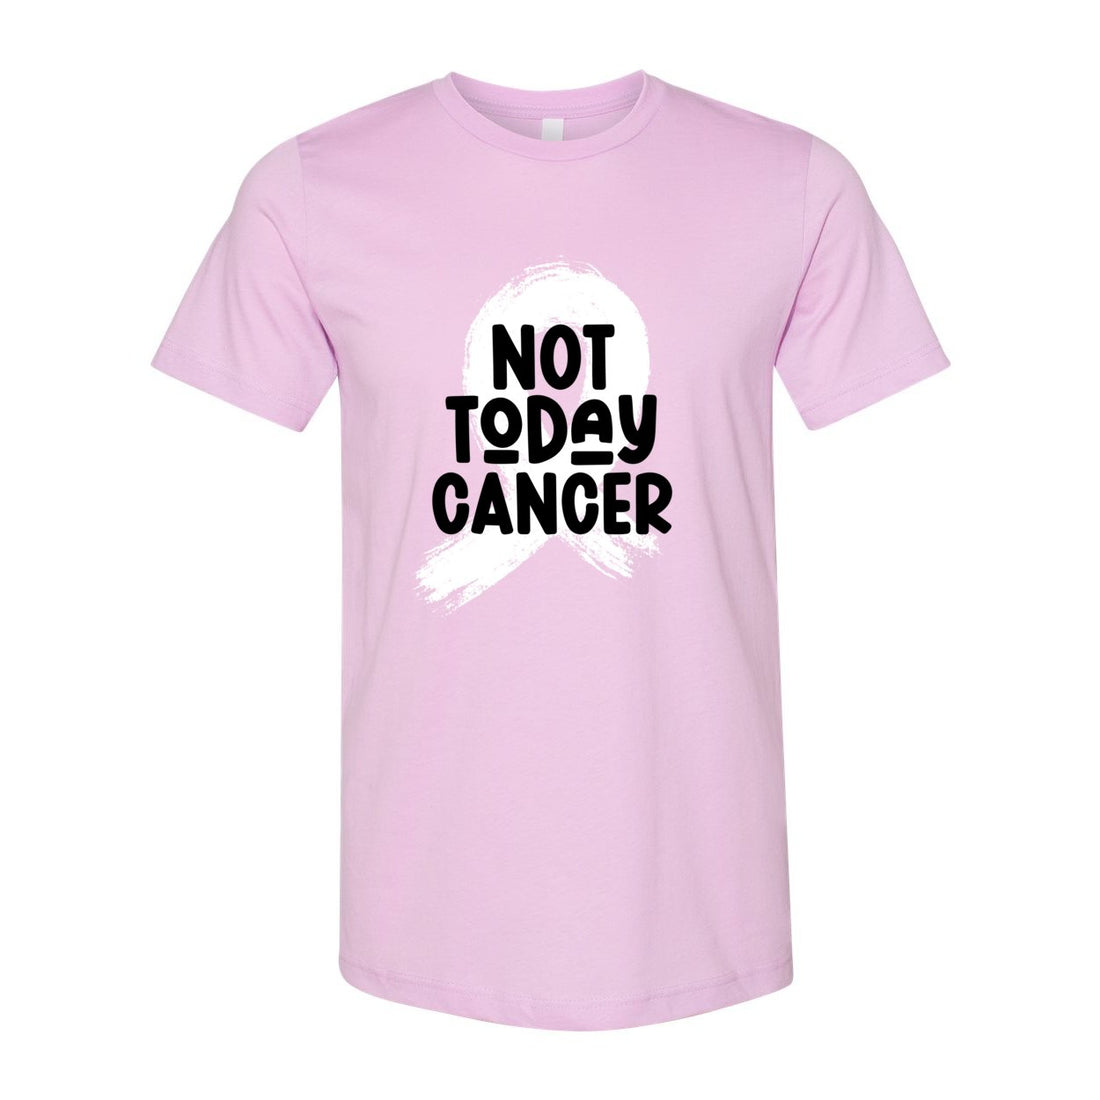 Not Today Cancer - T-Shirts - Positively Sassy - Not Today Cancer